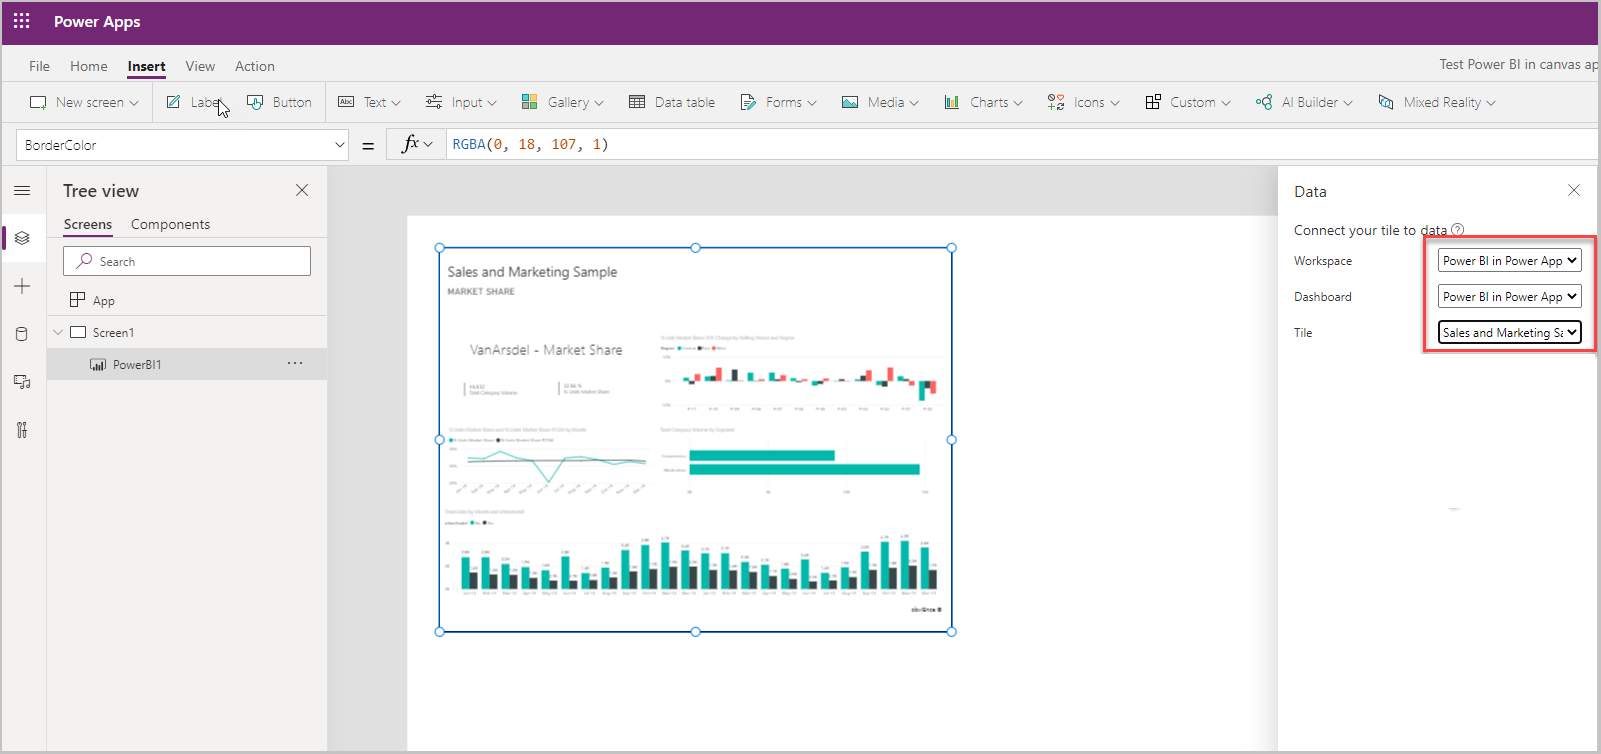 Power BI Tile is added to the canvas app